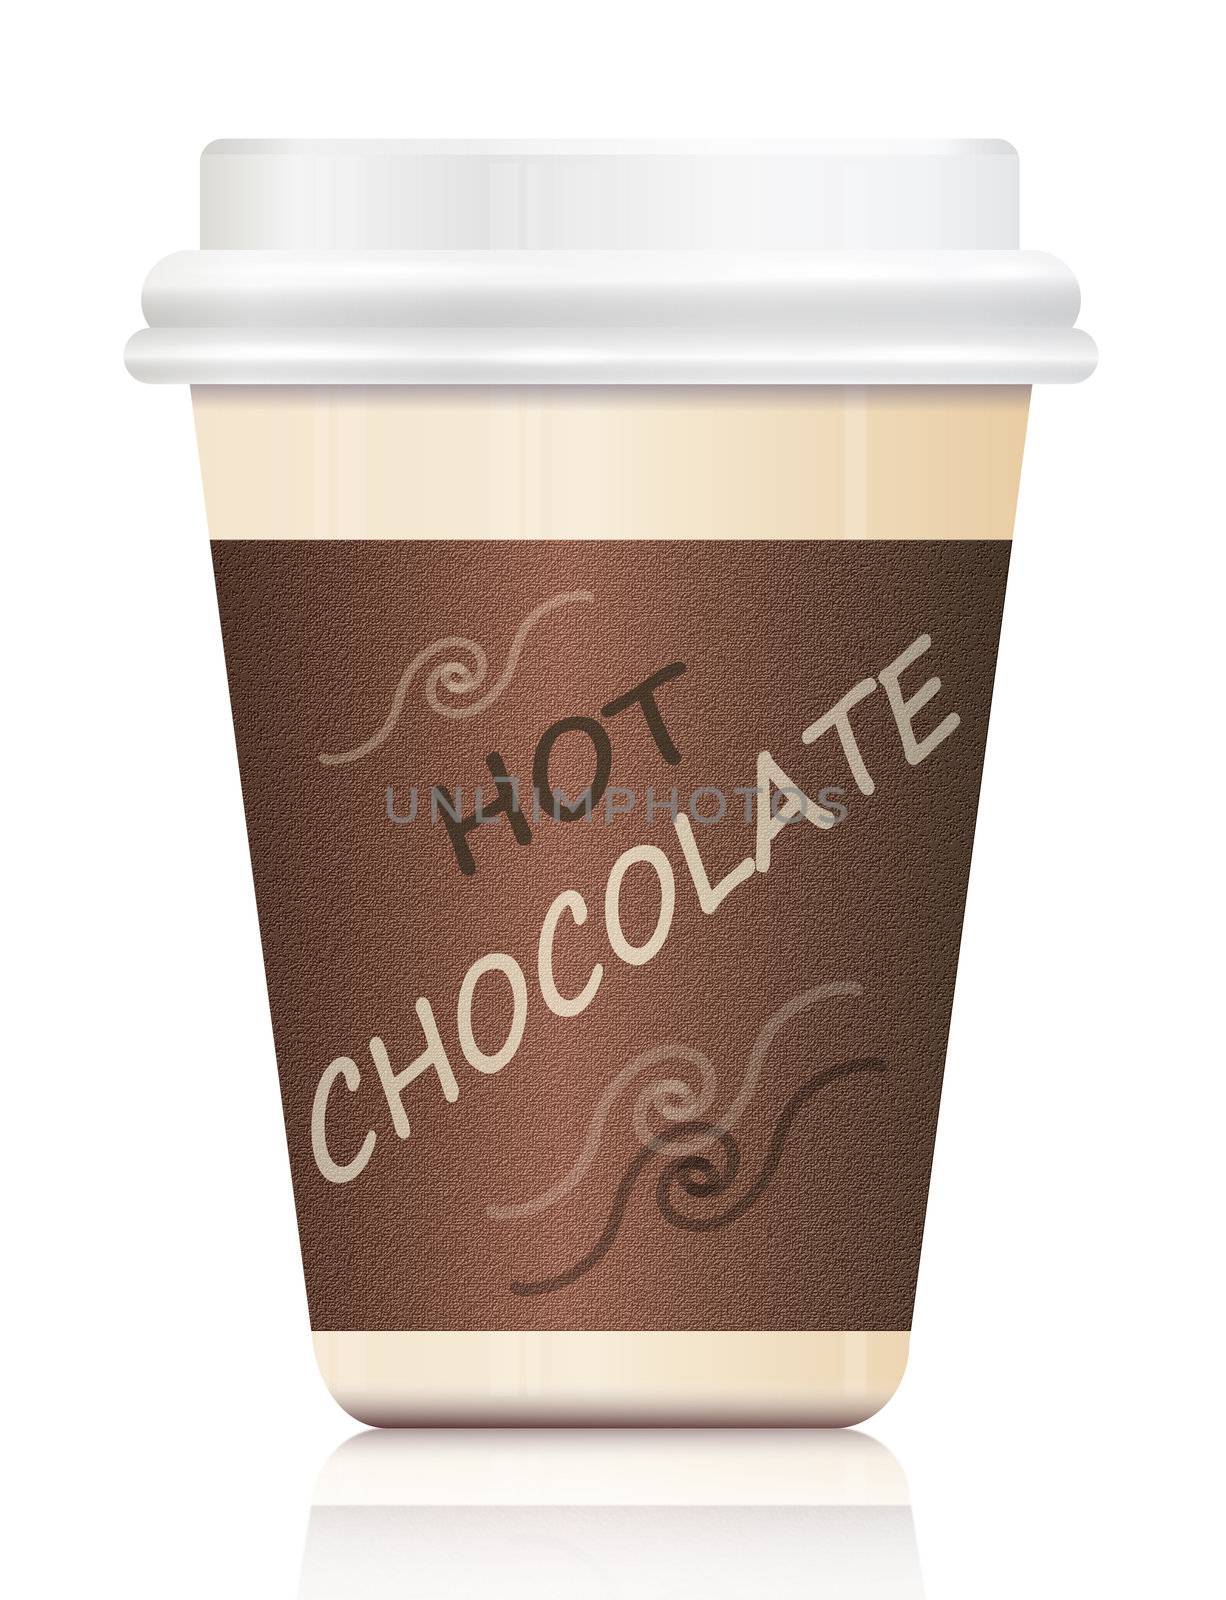 Illustration depicting a single hot chocolate take out container arranged over white.